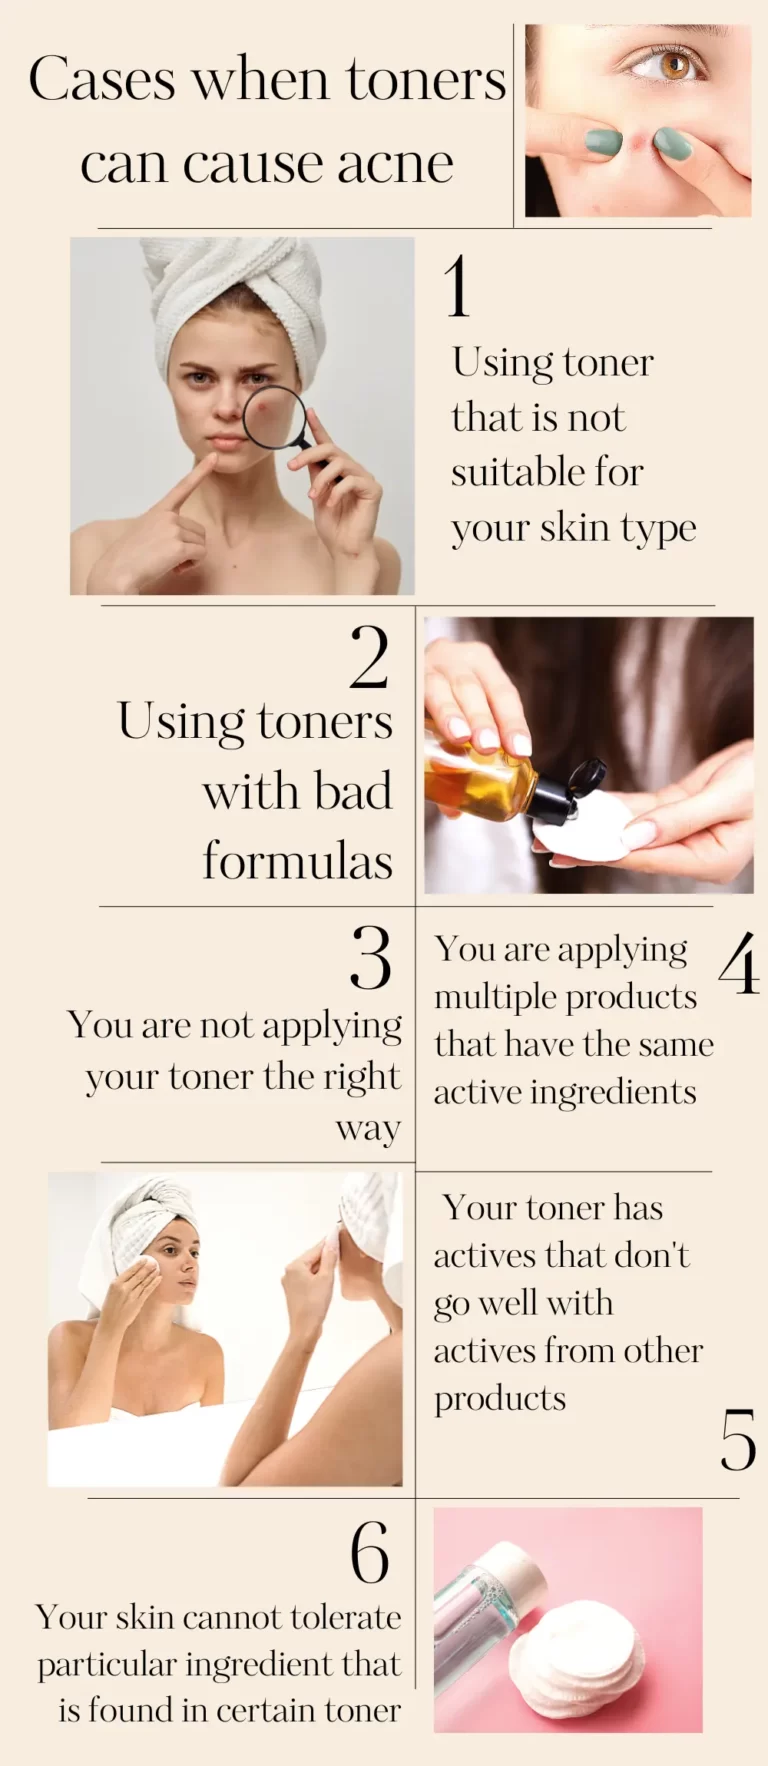 Cases when toners can cause acne